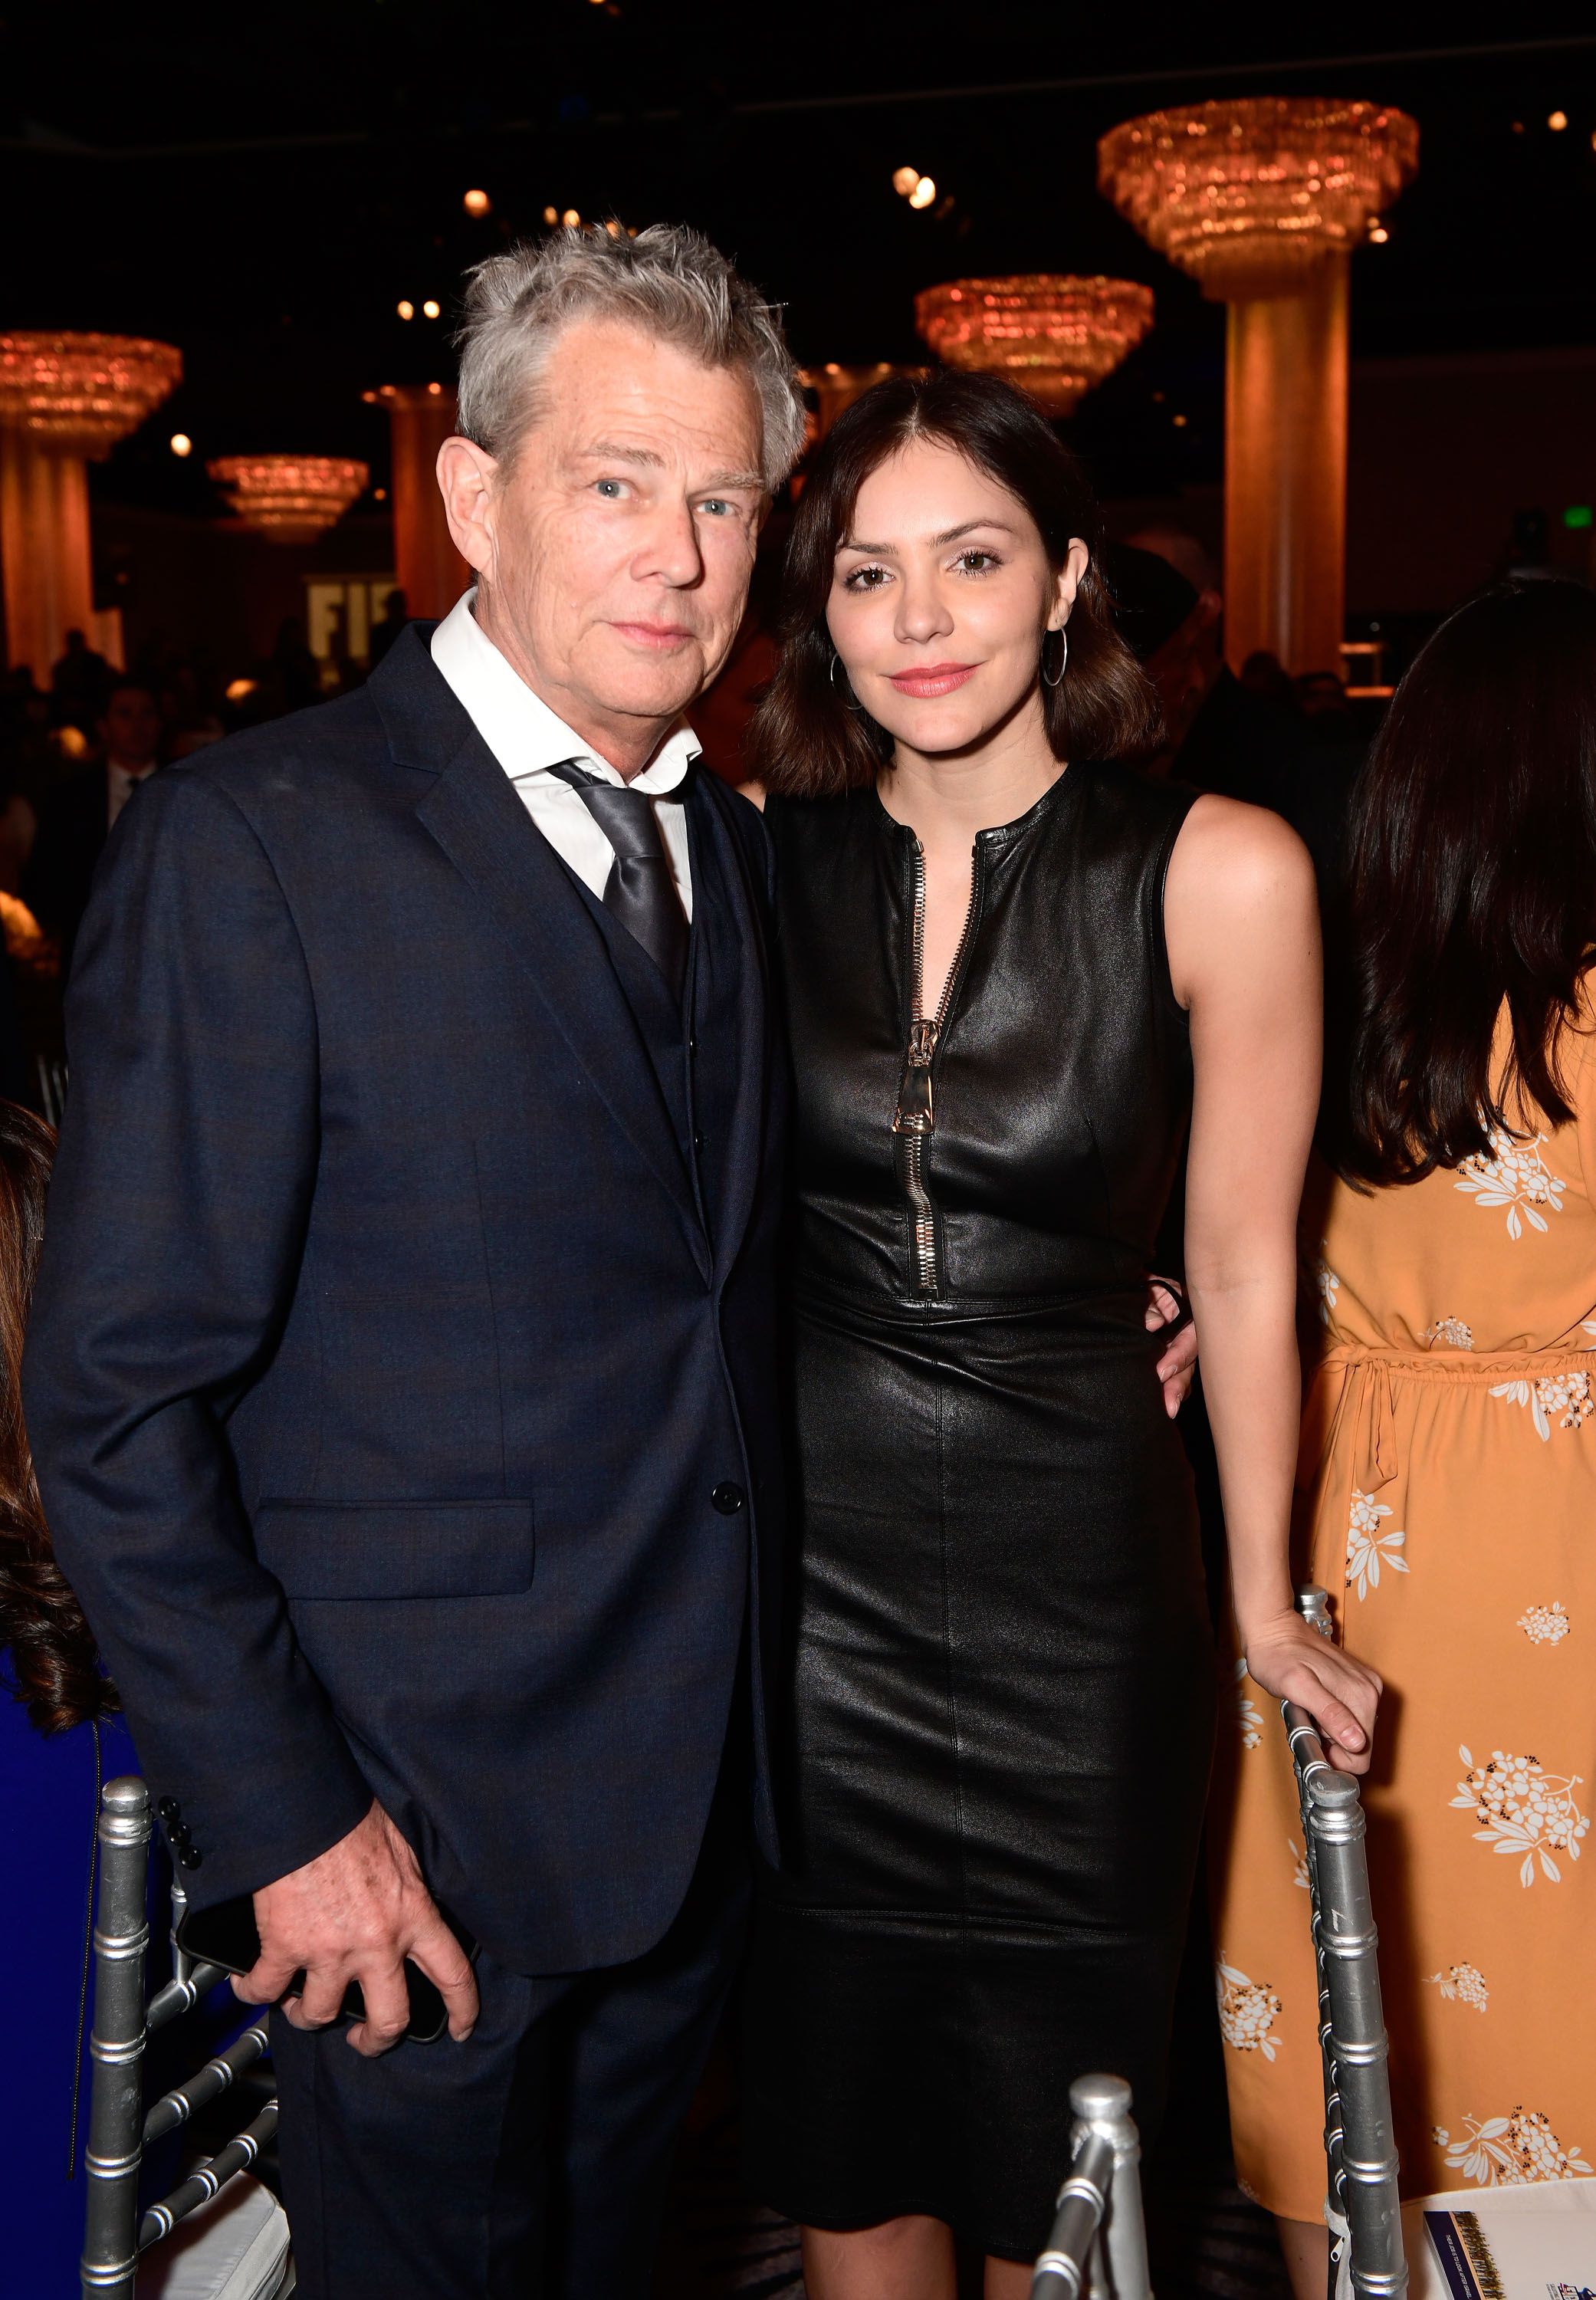 David Foster and Katharine McPhee at Friends of The Israel Defense Forces (FIDF) Western Region Gala on November 1, 2018, in Beverly Hills, California | Photo: Shahar Azran/Getty Images